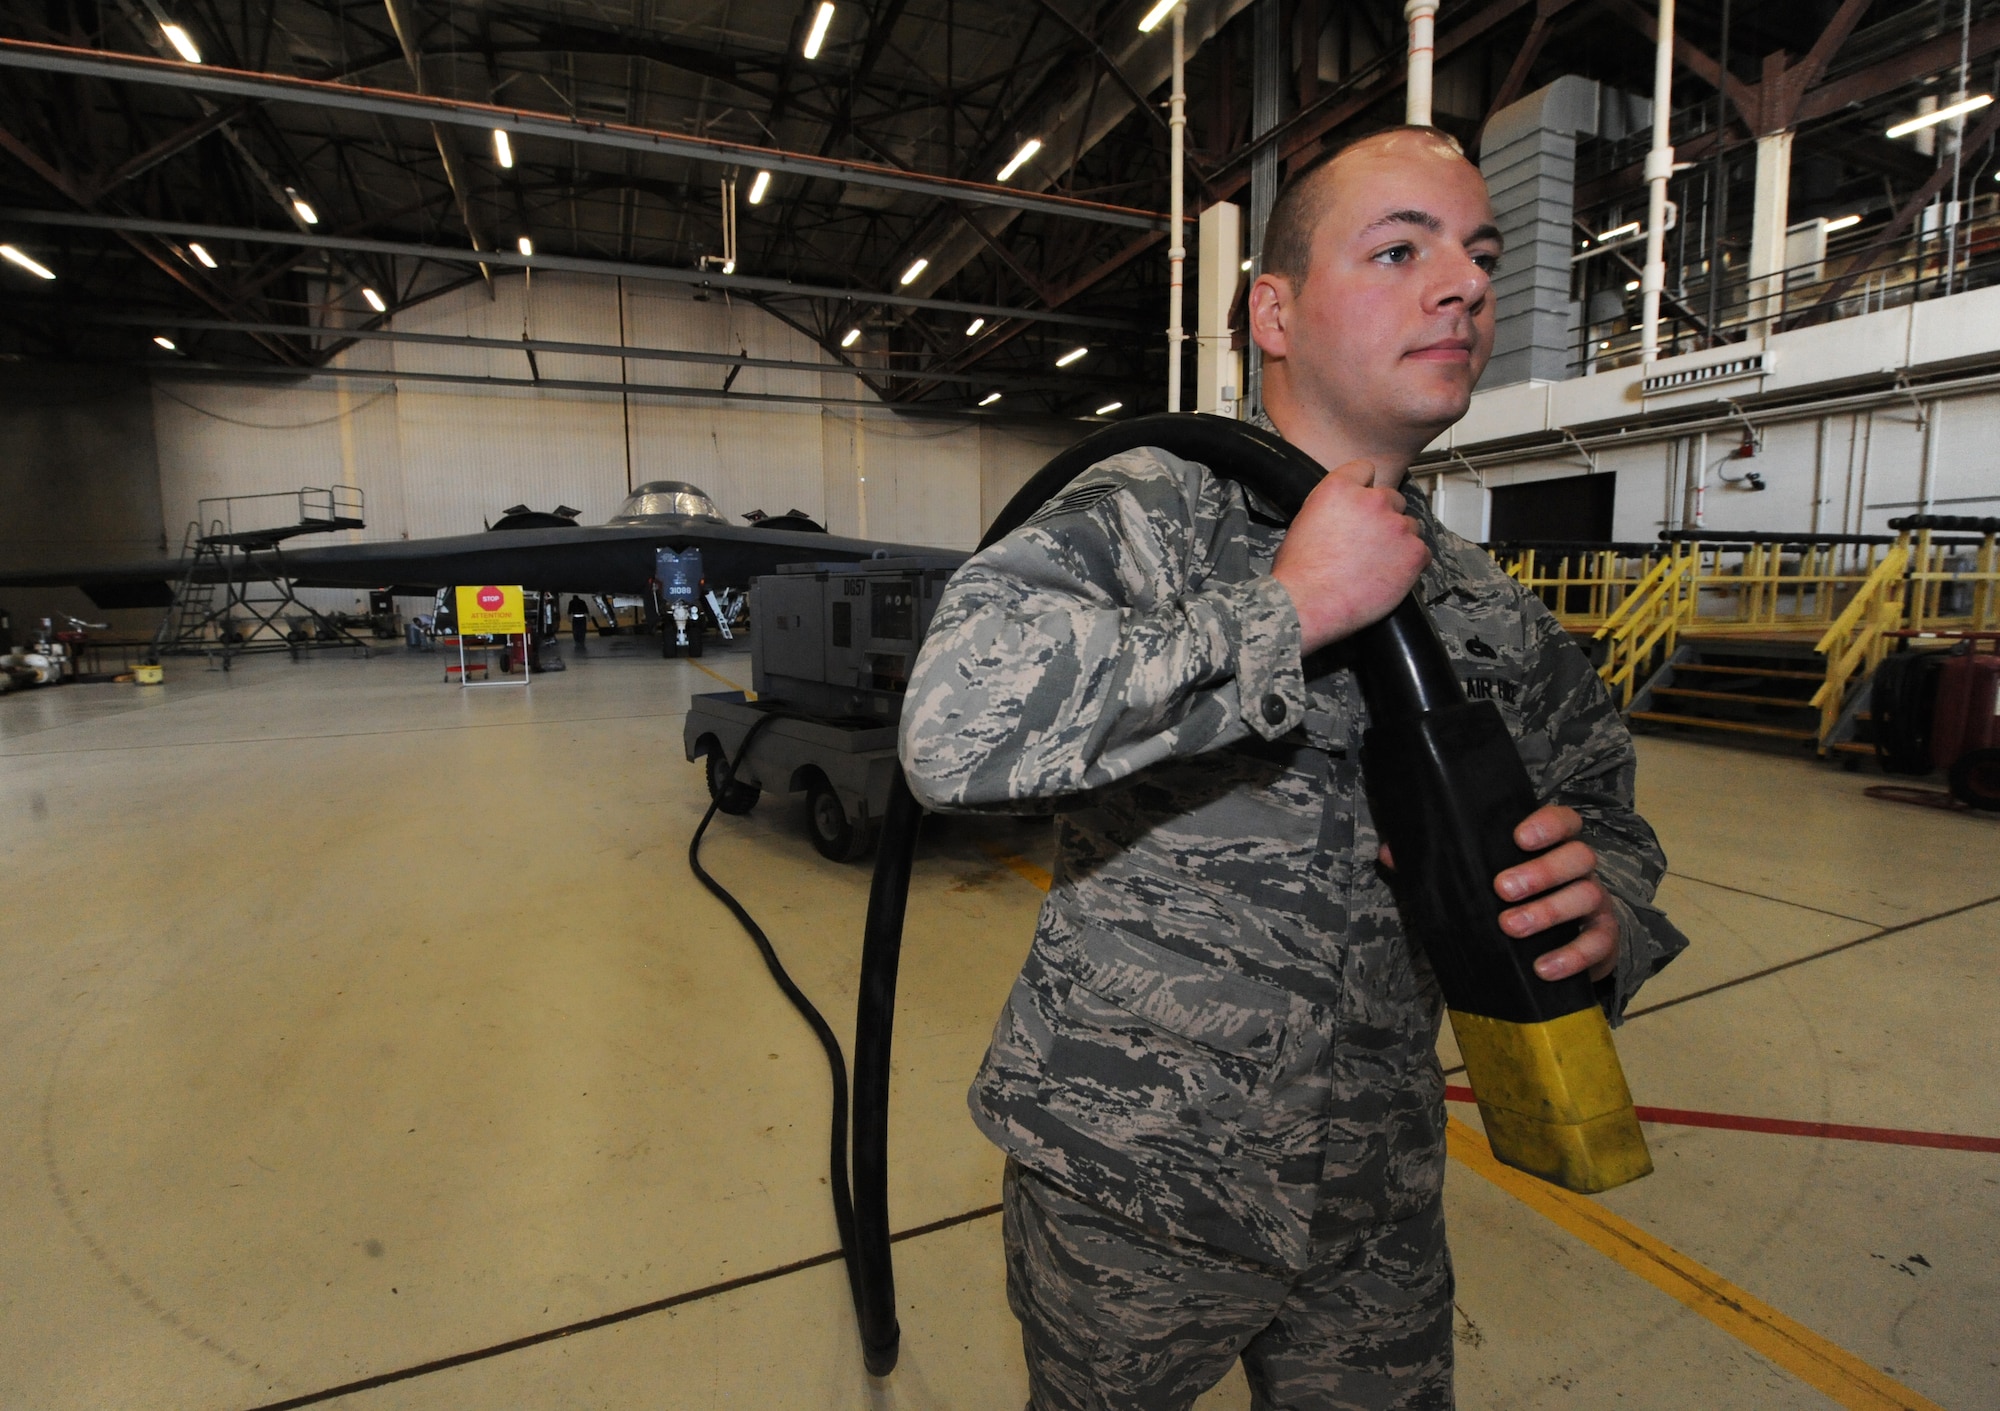 U.S. Air Force Tech Sgt. Aaron Bradley, a 393d Aircraft Maintenance Unit specialist section chief, prepares to supply power to a B-2 Spirit at Whiteman Air Force Base, Mo., Feb. 18, 2016. The power, provided by a generator, allows operation of the aircraft avionics system and is essential when working on the B-2’s landing gear. (U.S. Air Force photo by Tech. Sgt. Miguel Lara III) 